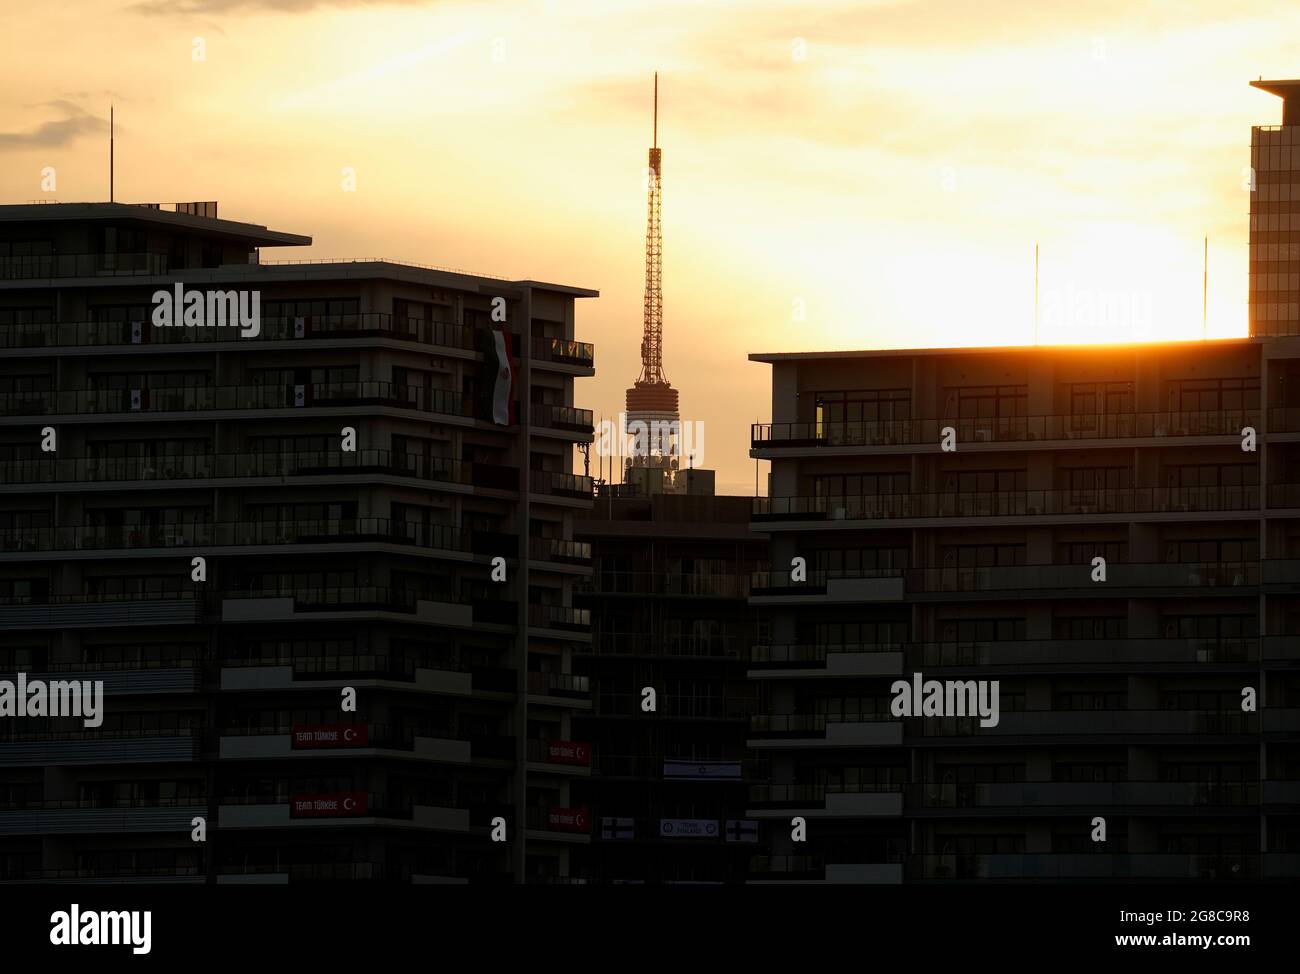 The Tokyo Tower is seen through the 2020 Tokyo Olympic Games Athletes' Village in Tokyo, Japan, July 19, 2021. REUTERS/Naoki Ogura Stock Photo